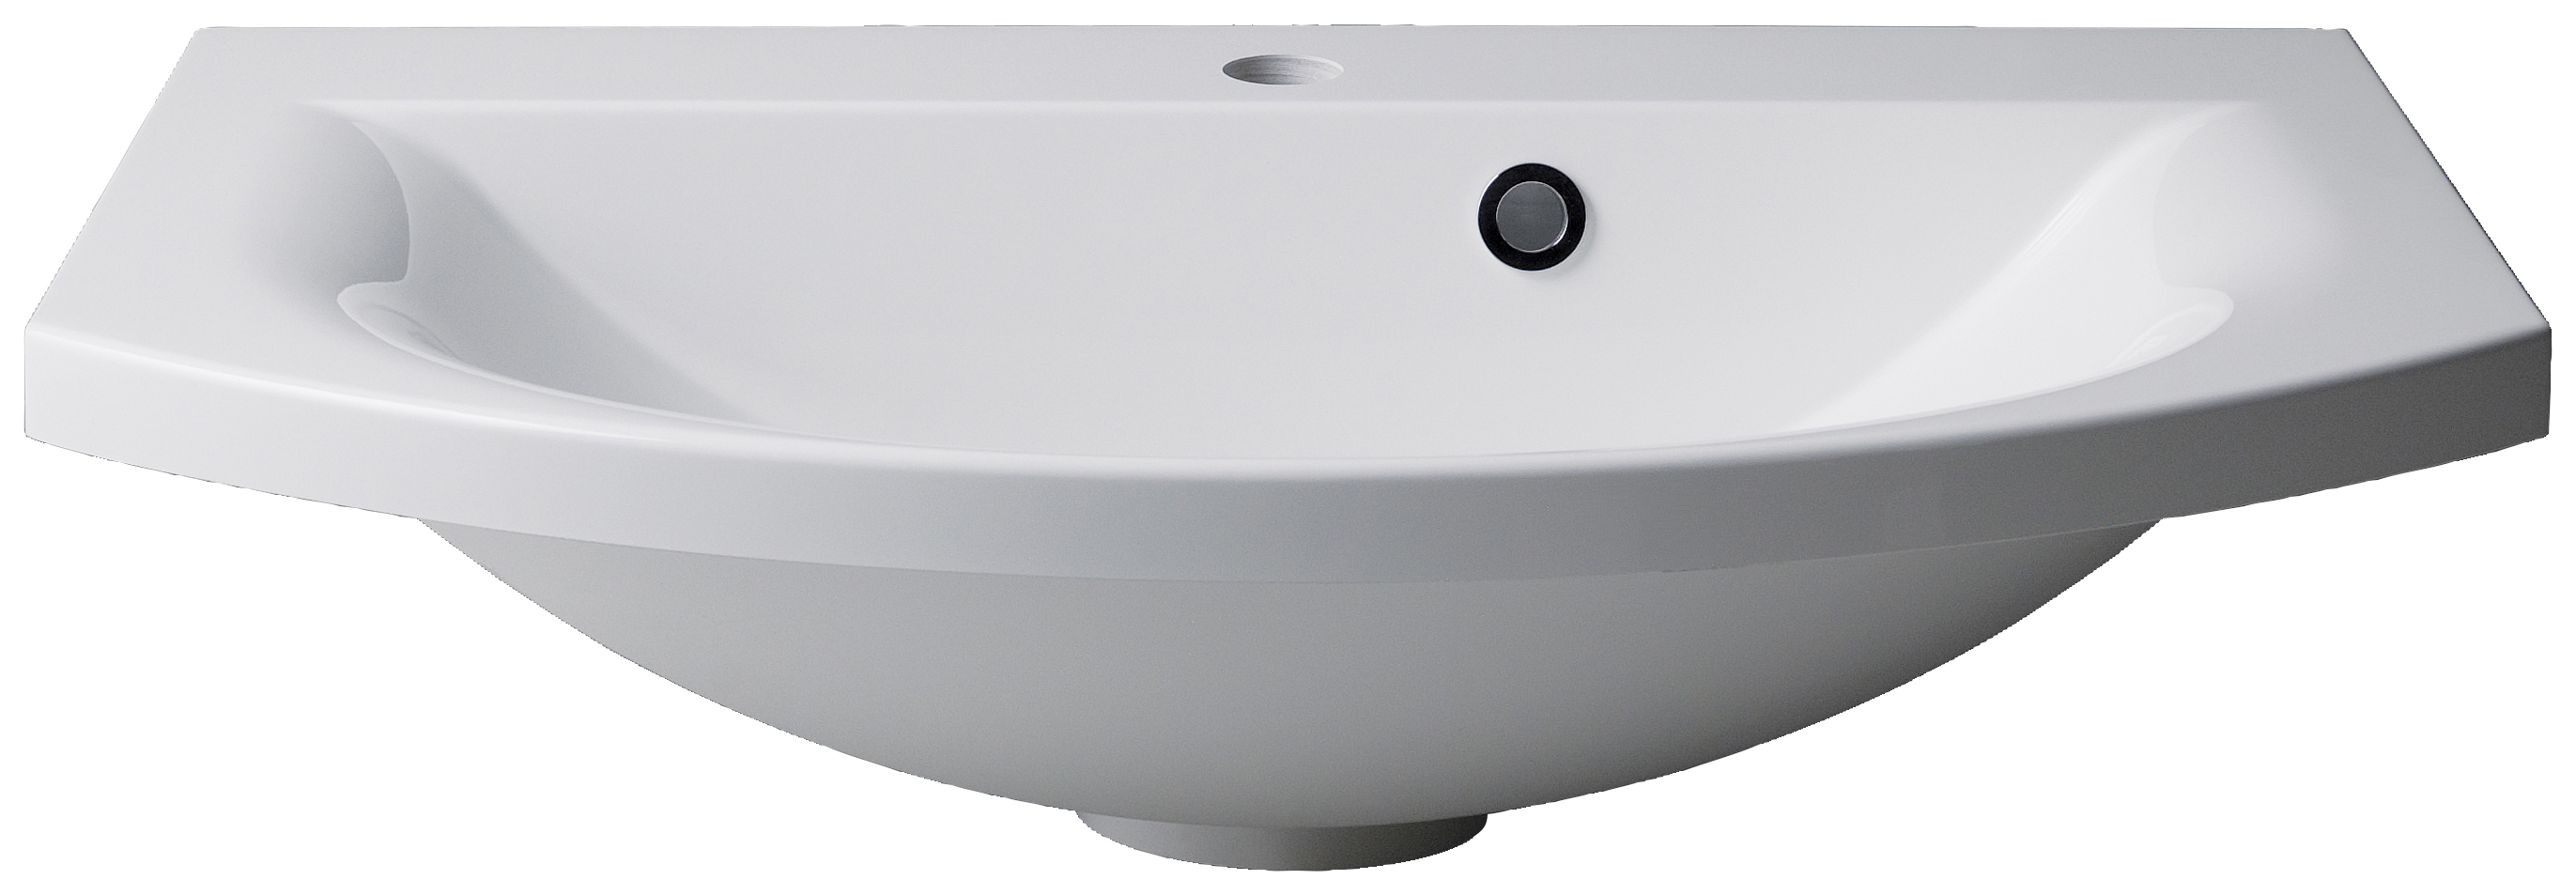 Image of Duarti By Calypso Belmont Semi Recessed Cast Marble Vanity Basin - 644mm